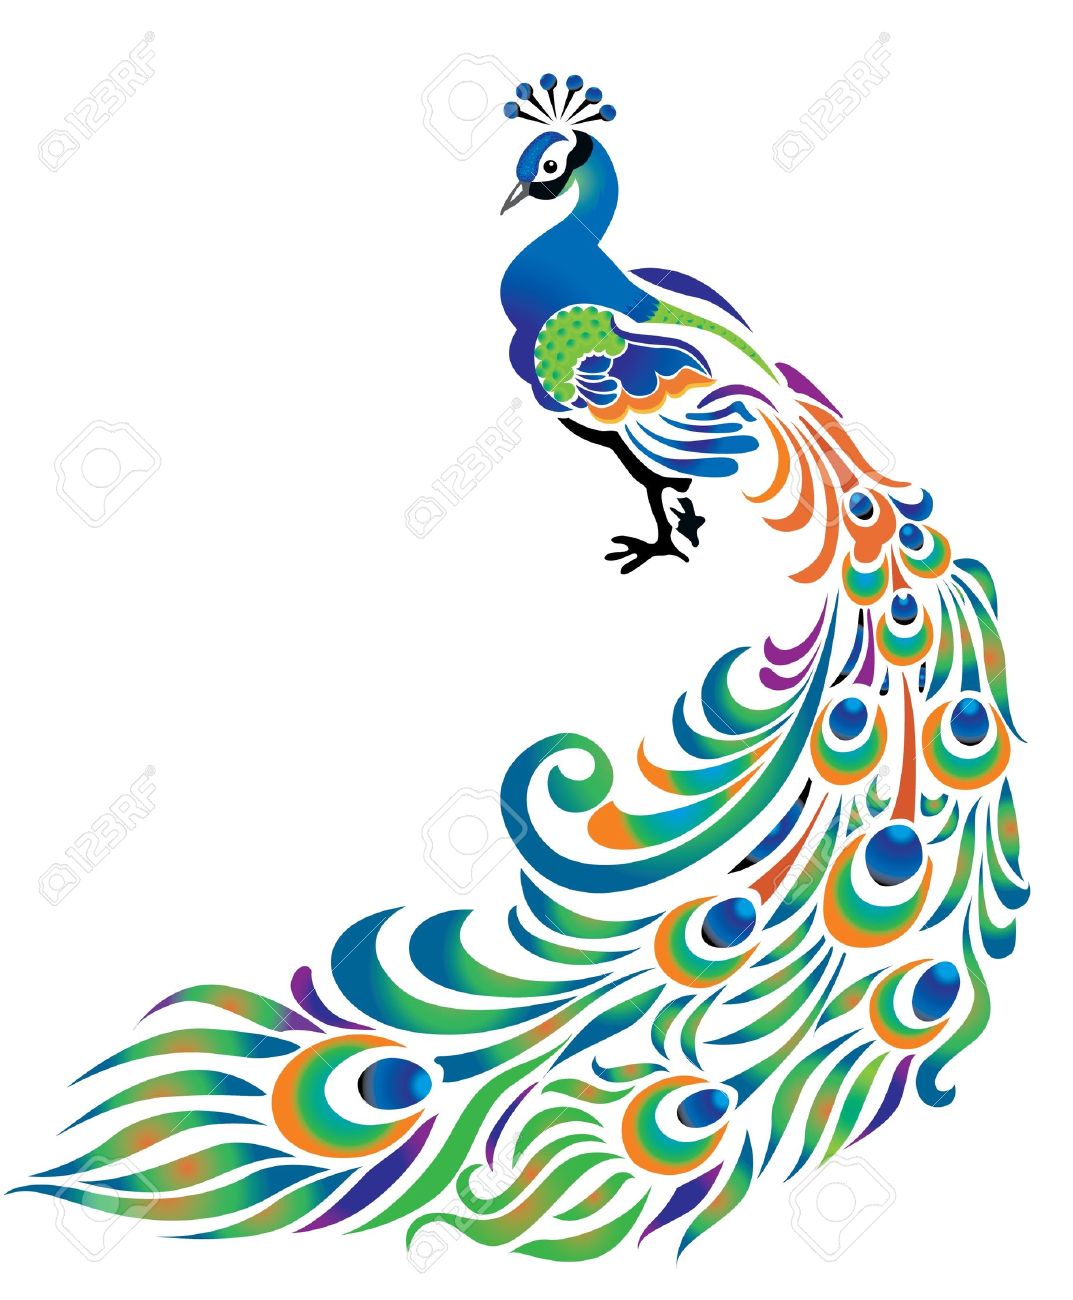 Peacock clipart #18, Download drawings